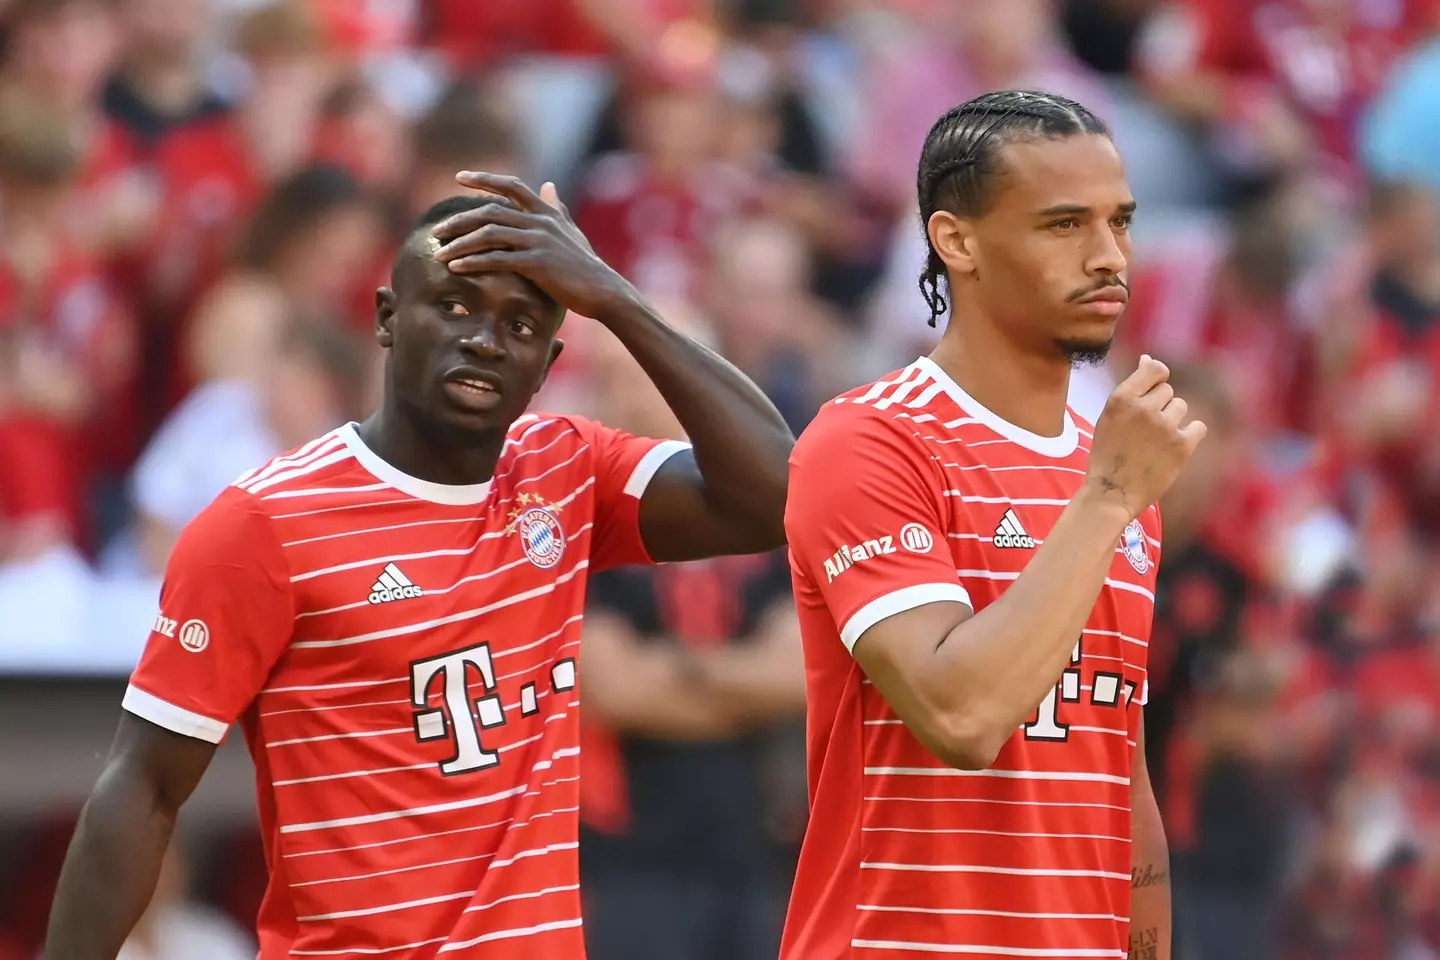 A confrontation between Mane and Bayern teammate Leroy Sane fuelled rumours of an exit. Image: Alamy